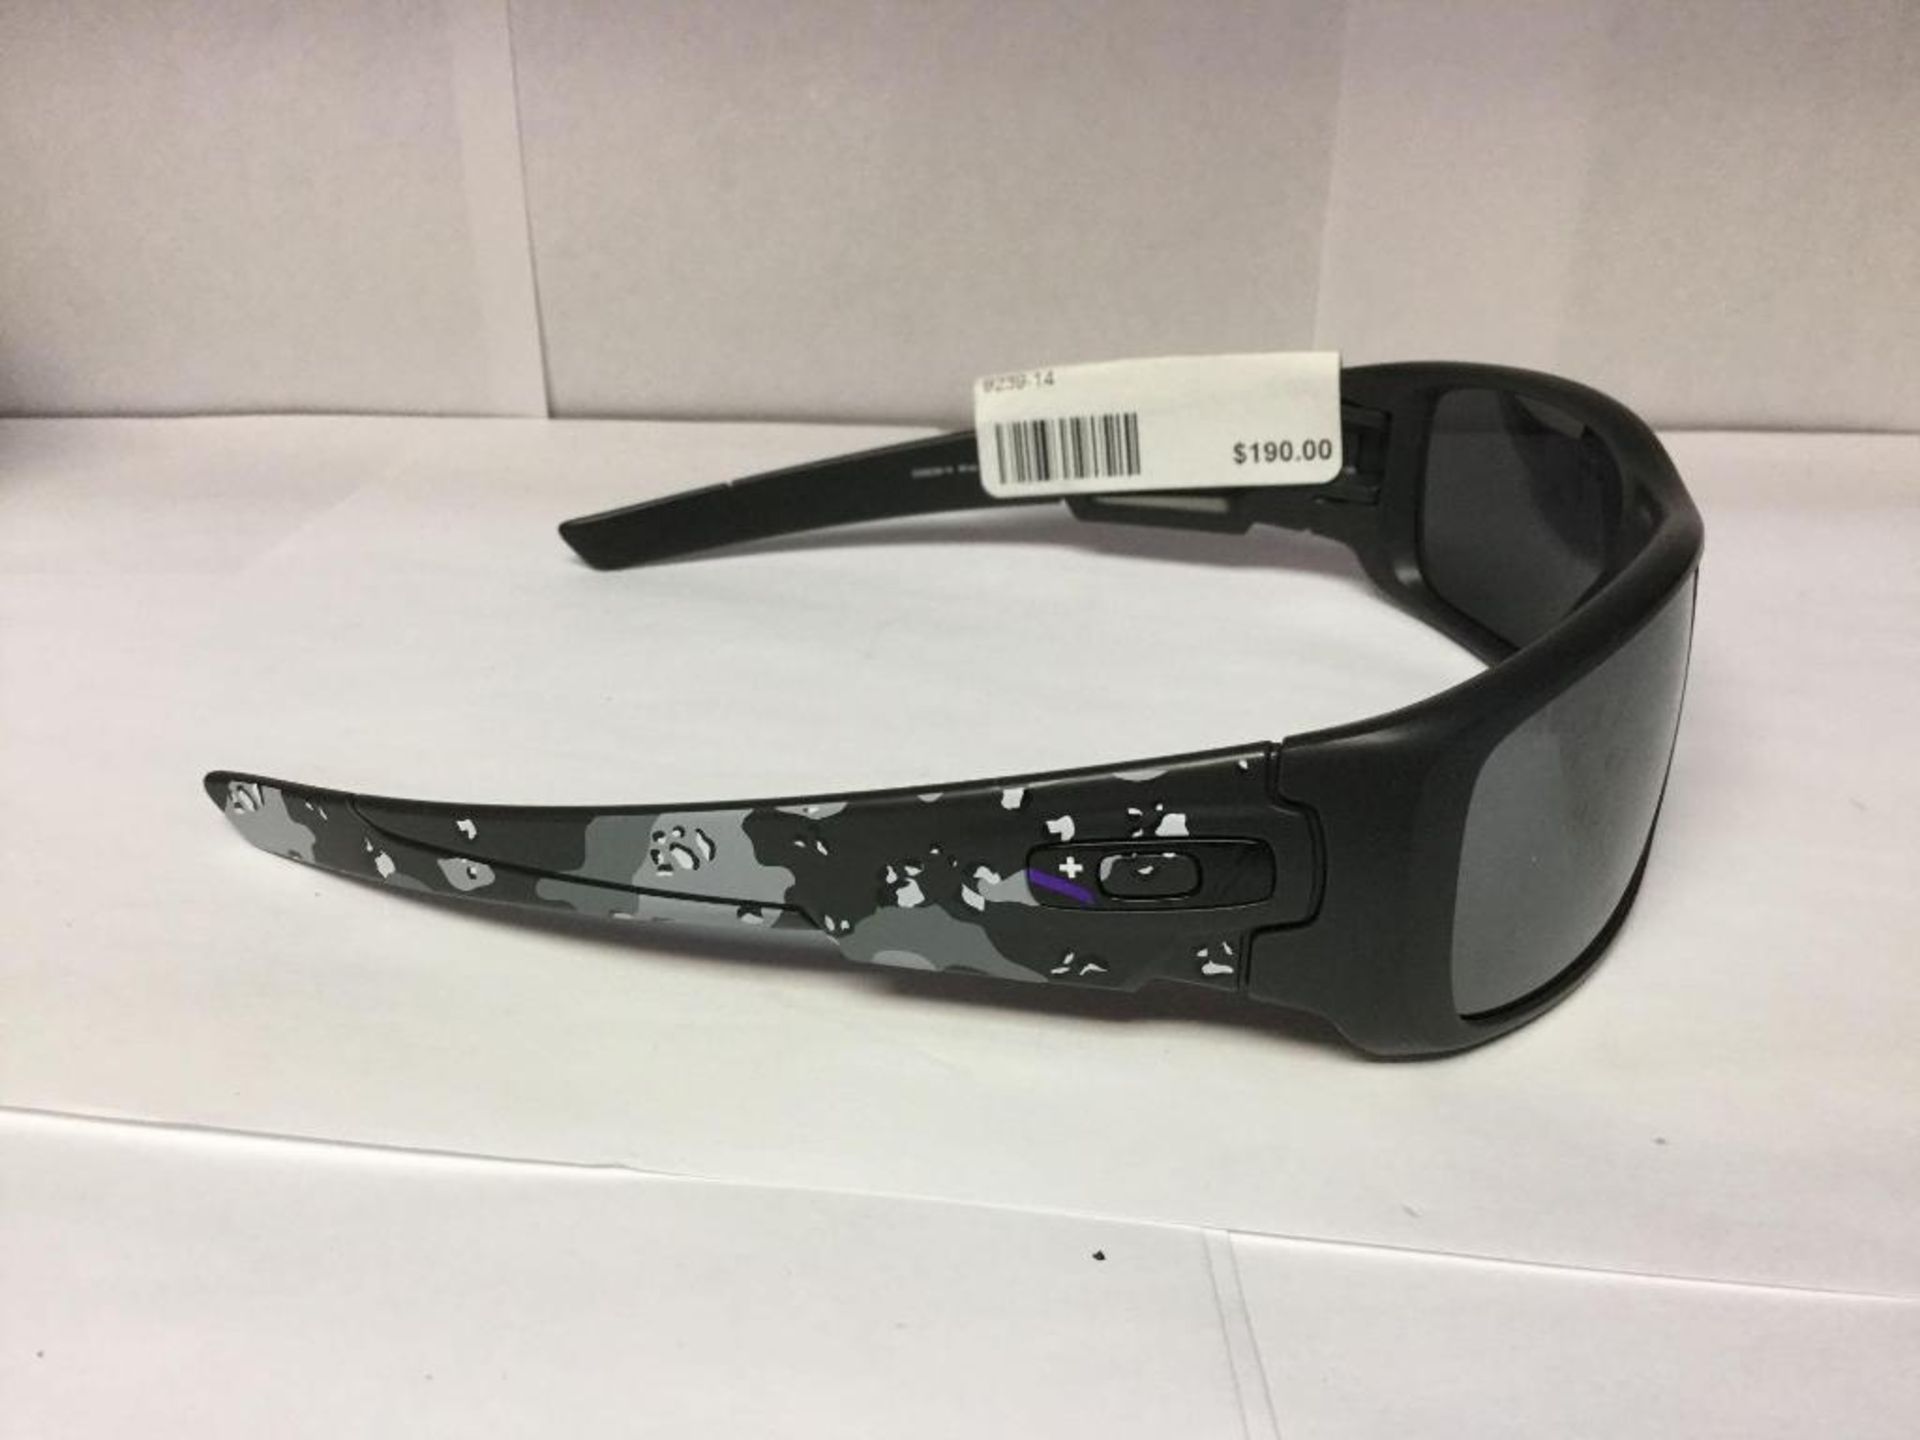 Oakley Sunglasses with Bag and Box Value $190 - Image 2 of 2